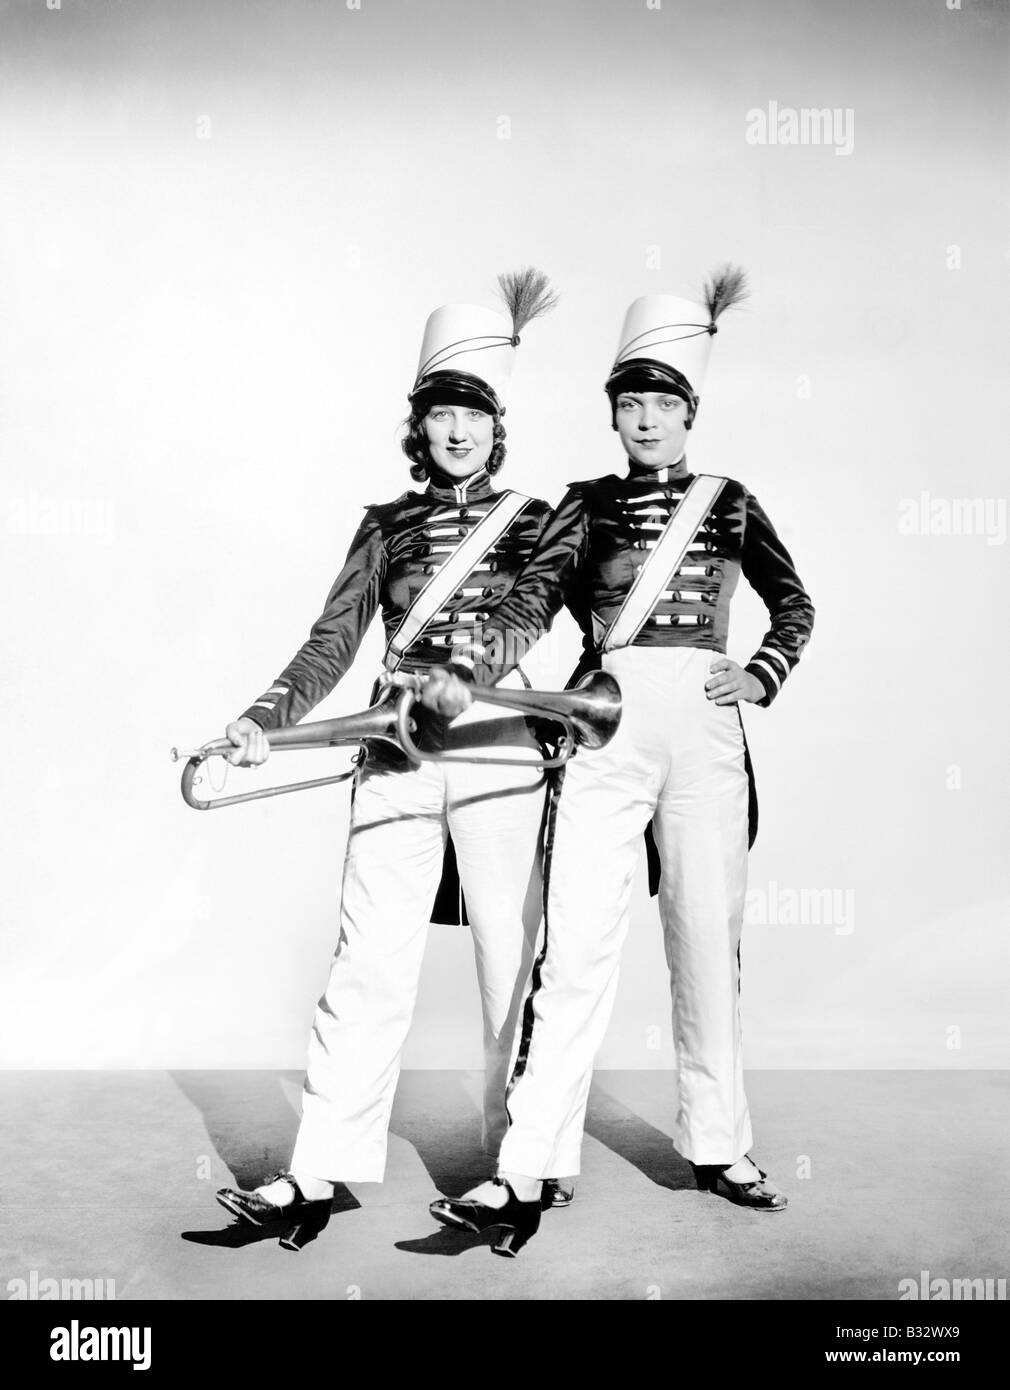 Two women toy soldiers ready for marching orders Stock Photo